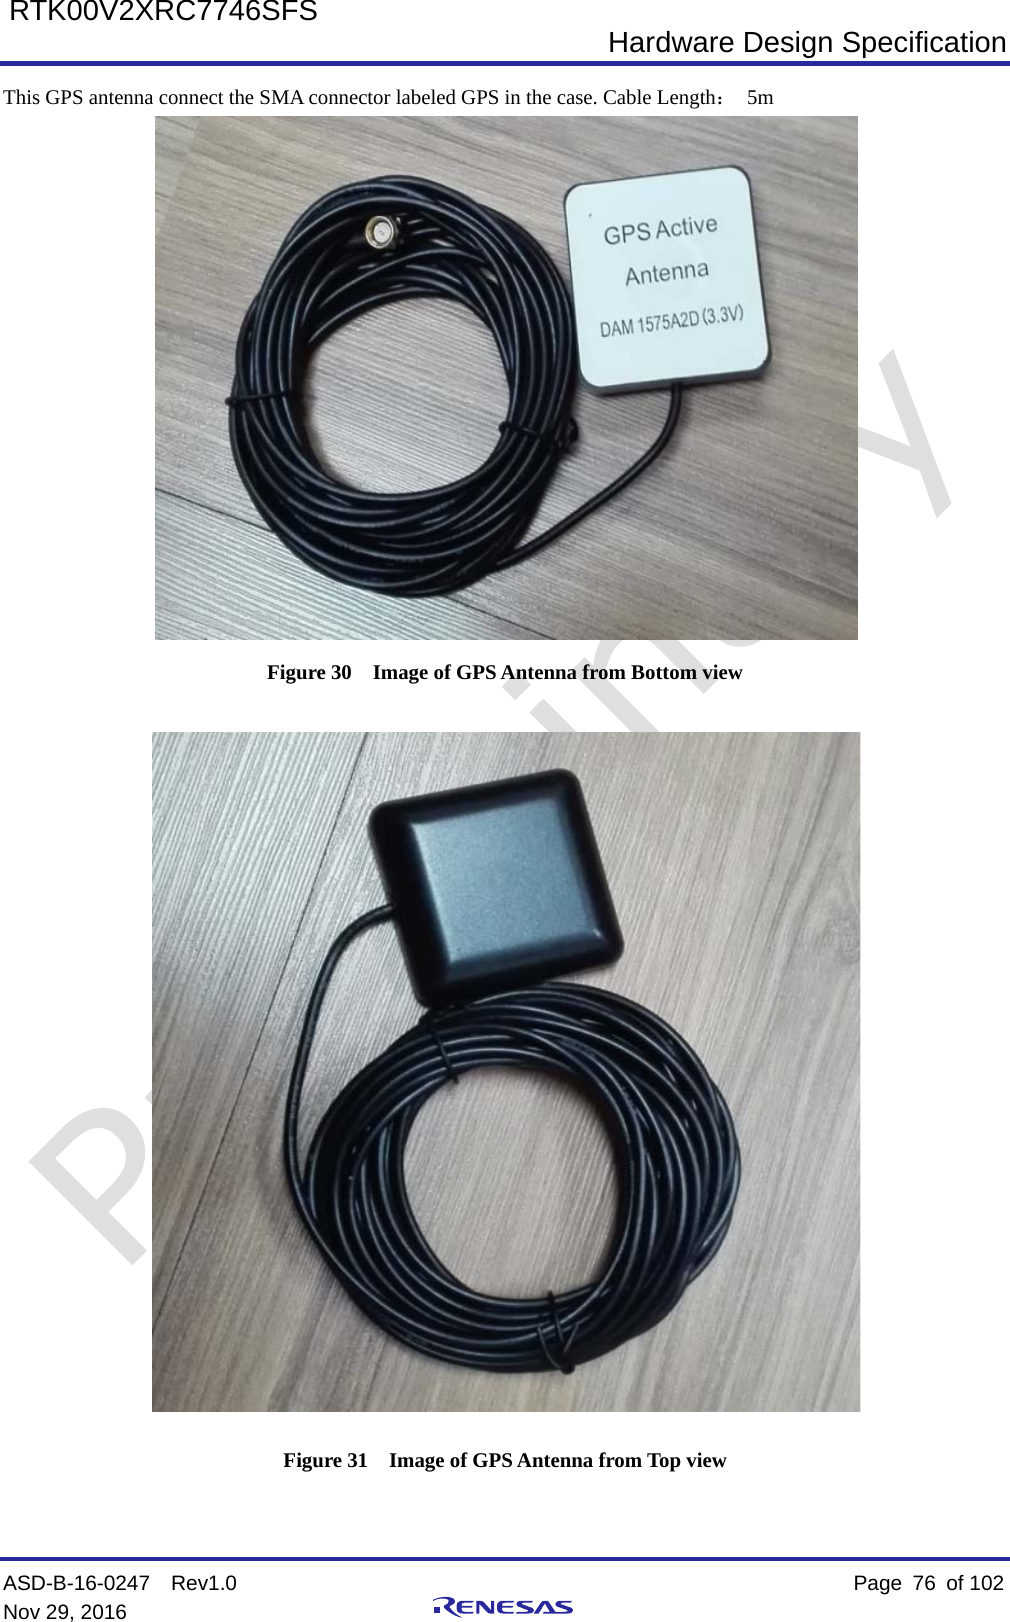  Hardware Design Specification ASD-B-16-0247  Rev1.0    Page  76 of 102 Nov 29, 2016     RTK00V2XRC7746SFS This GPS antenna connect the SMA connector labeled GPS in the case. Cable Length： 5m  Figure 30  Image of GPS Antenna from Bottom view  Figure 31  Image of GPS Antenna from Top view 